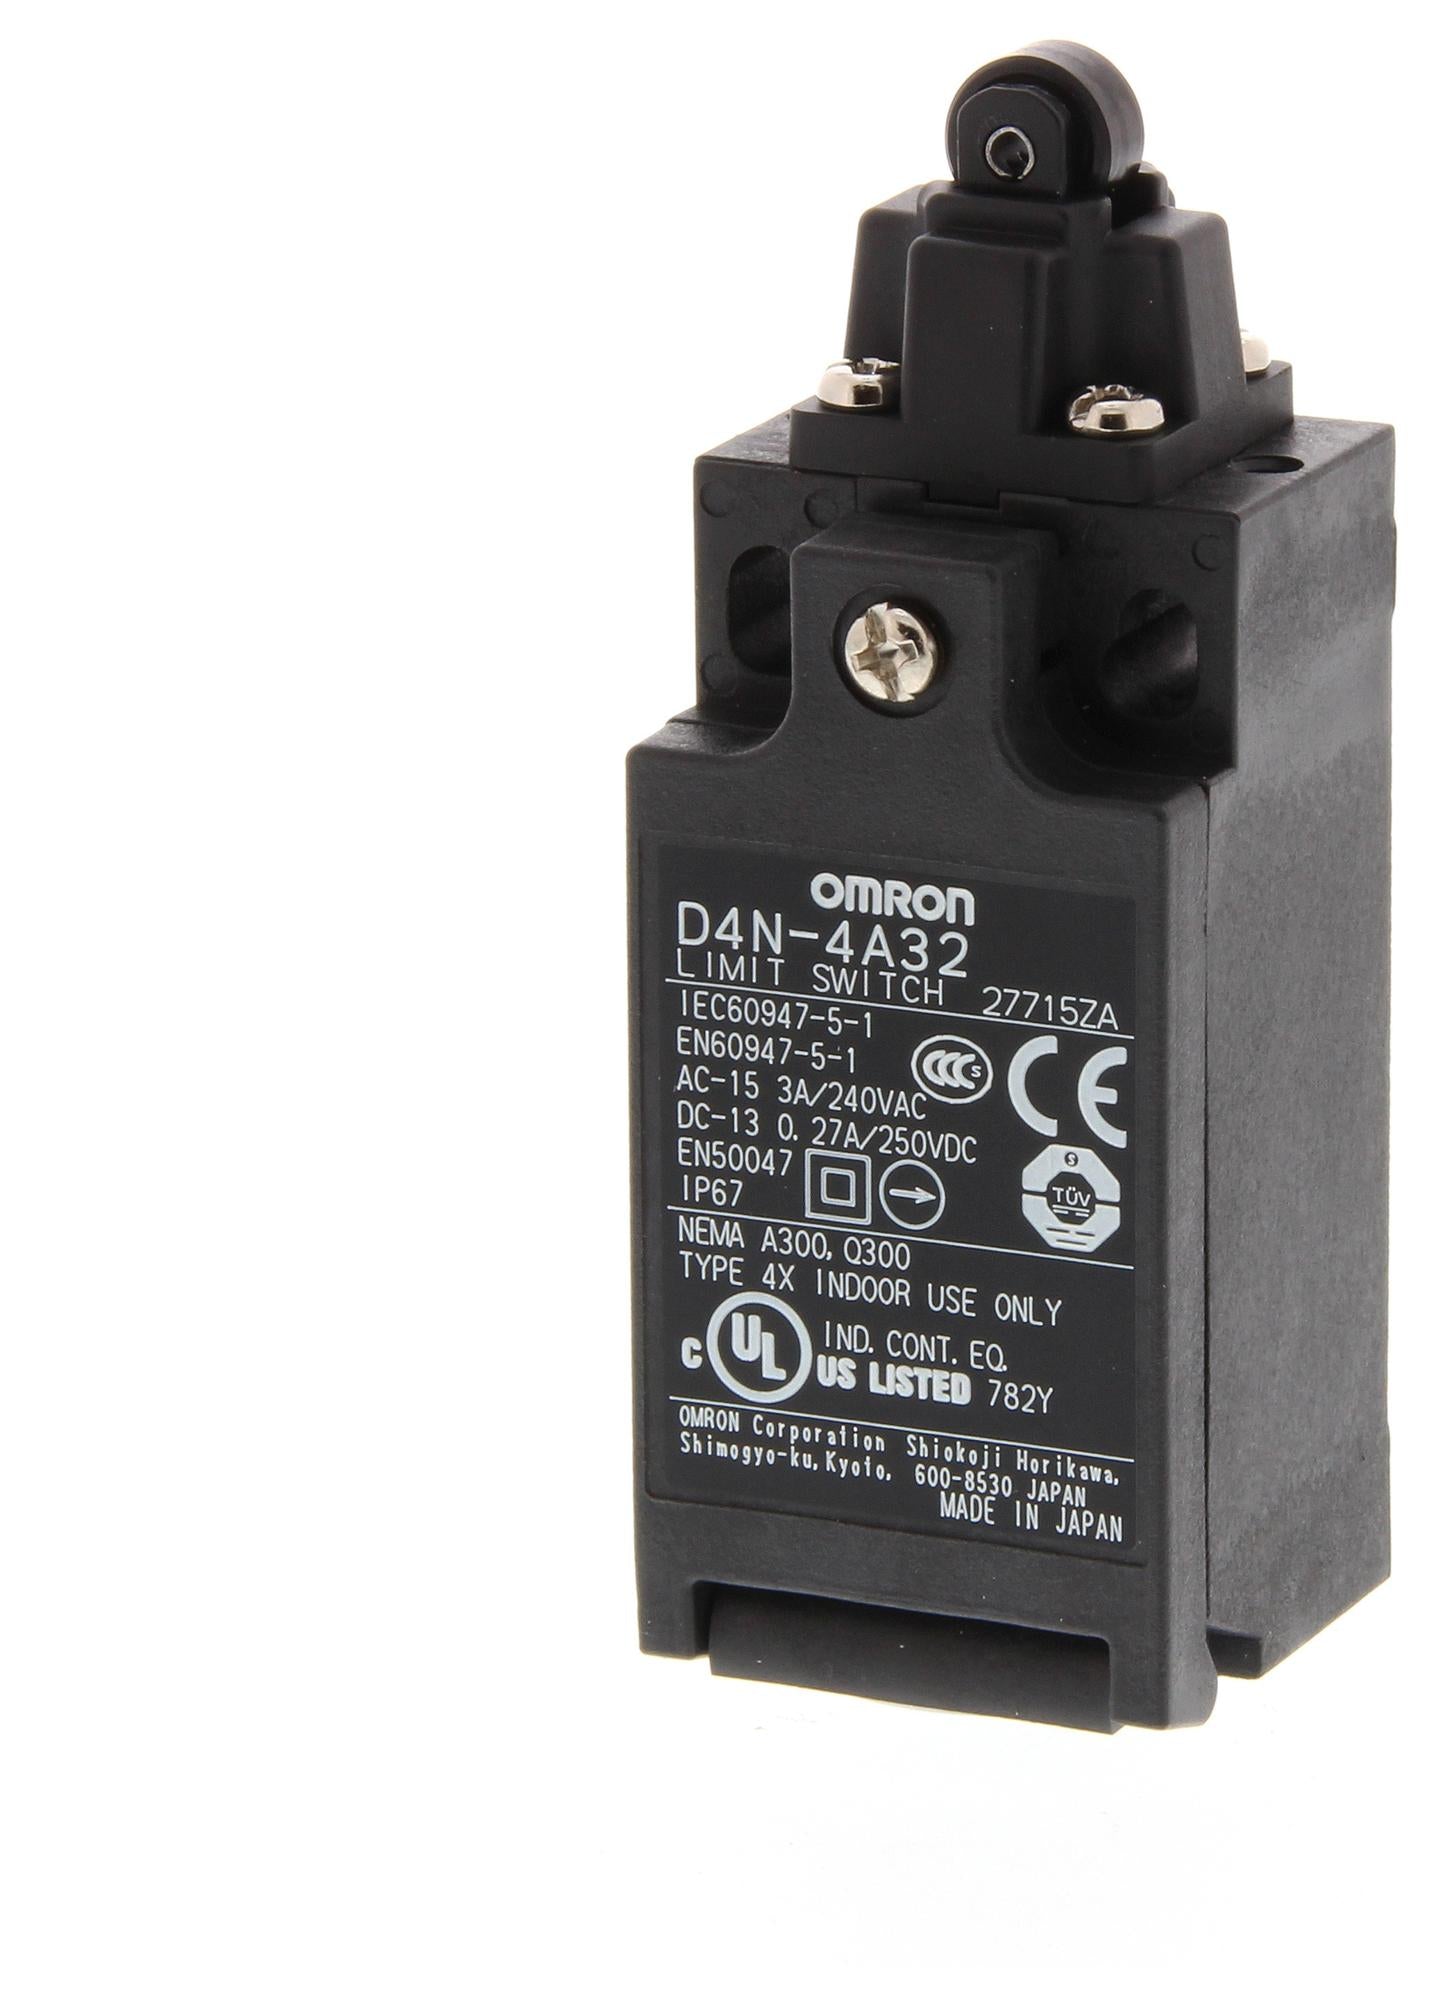 D4N-4A32 LIMIT SWITCH SWITCHES OMRON